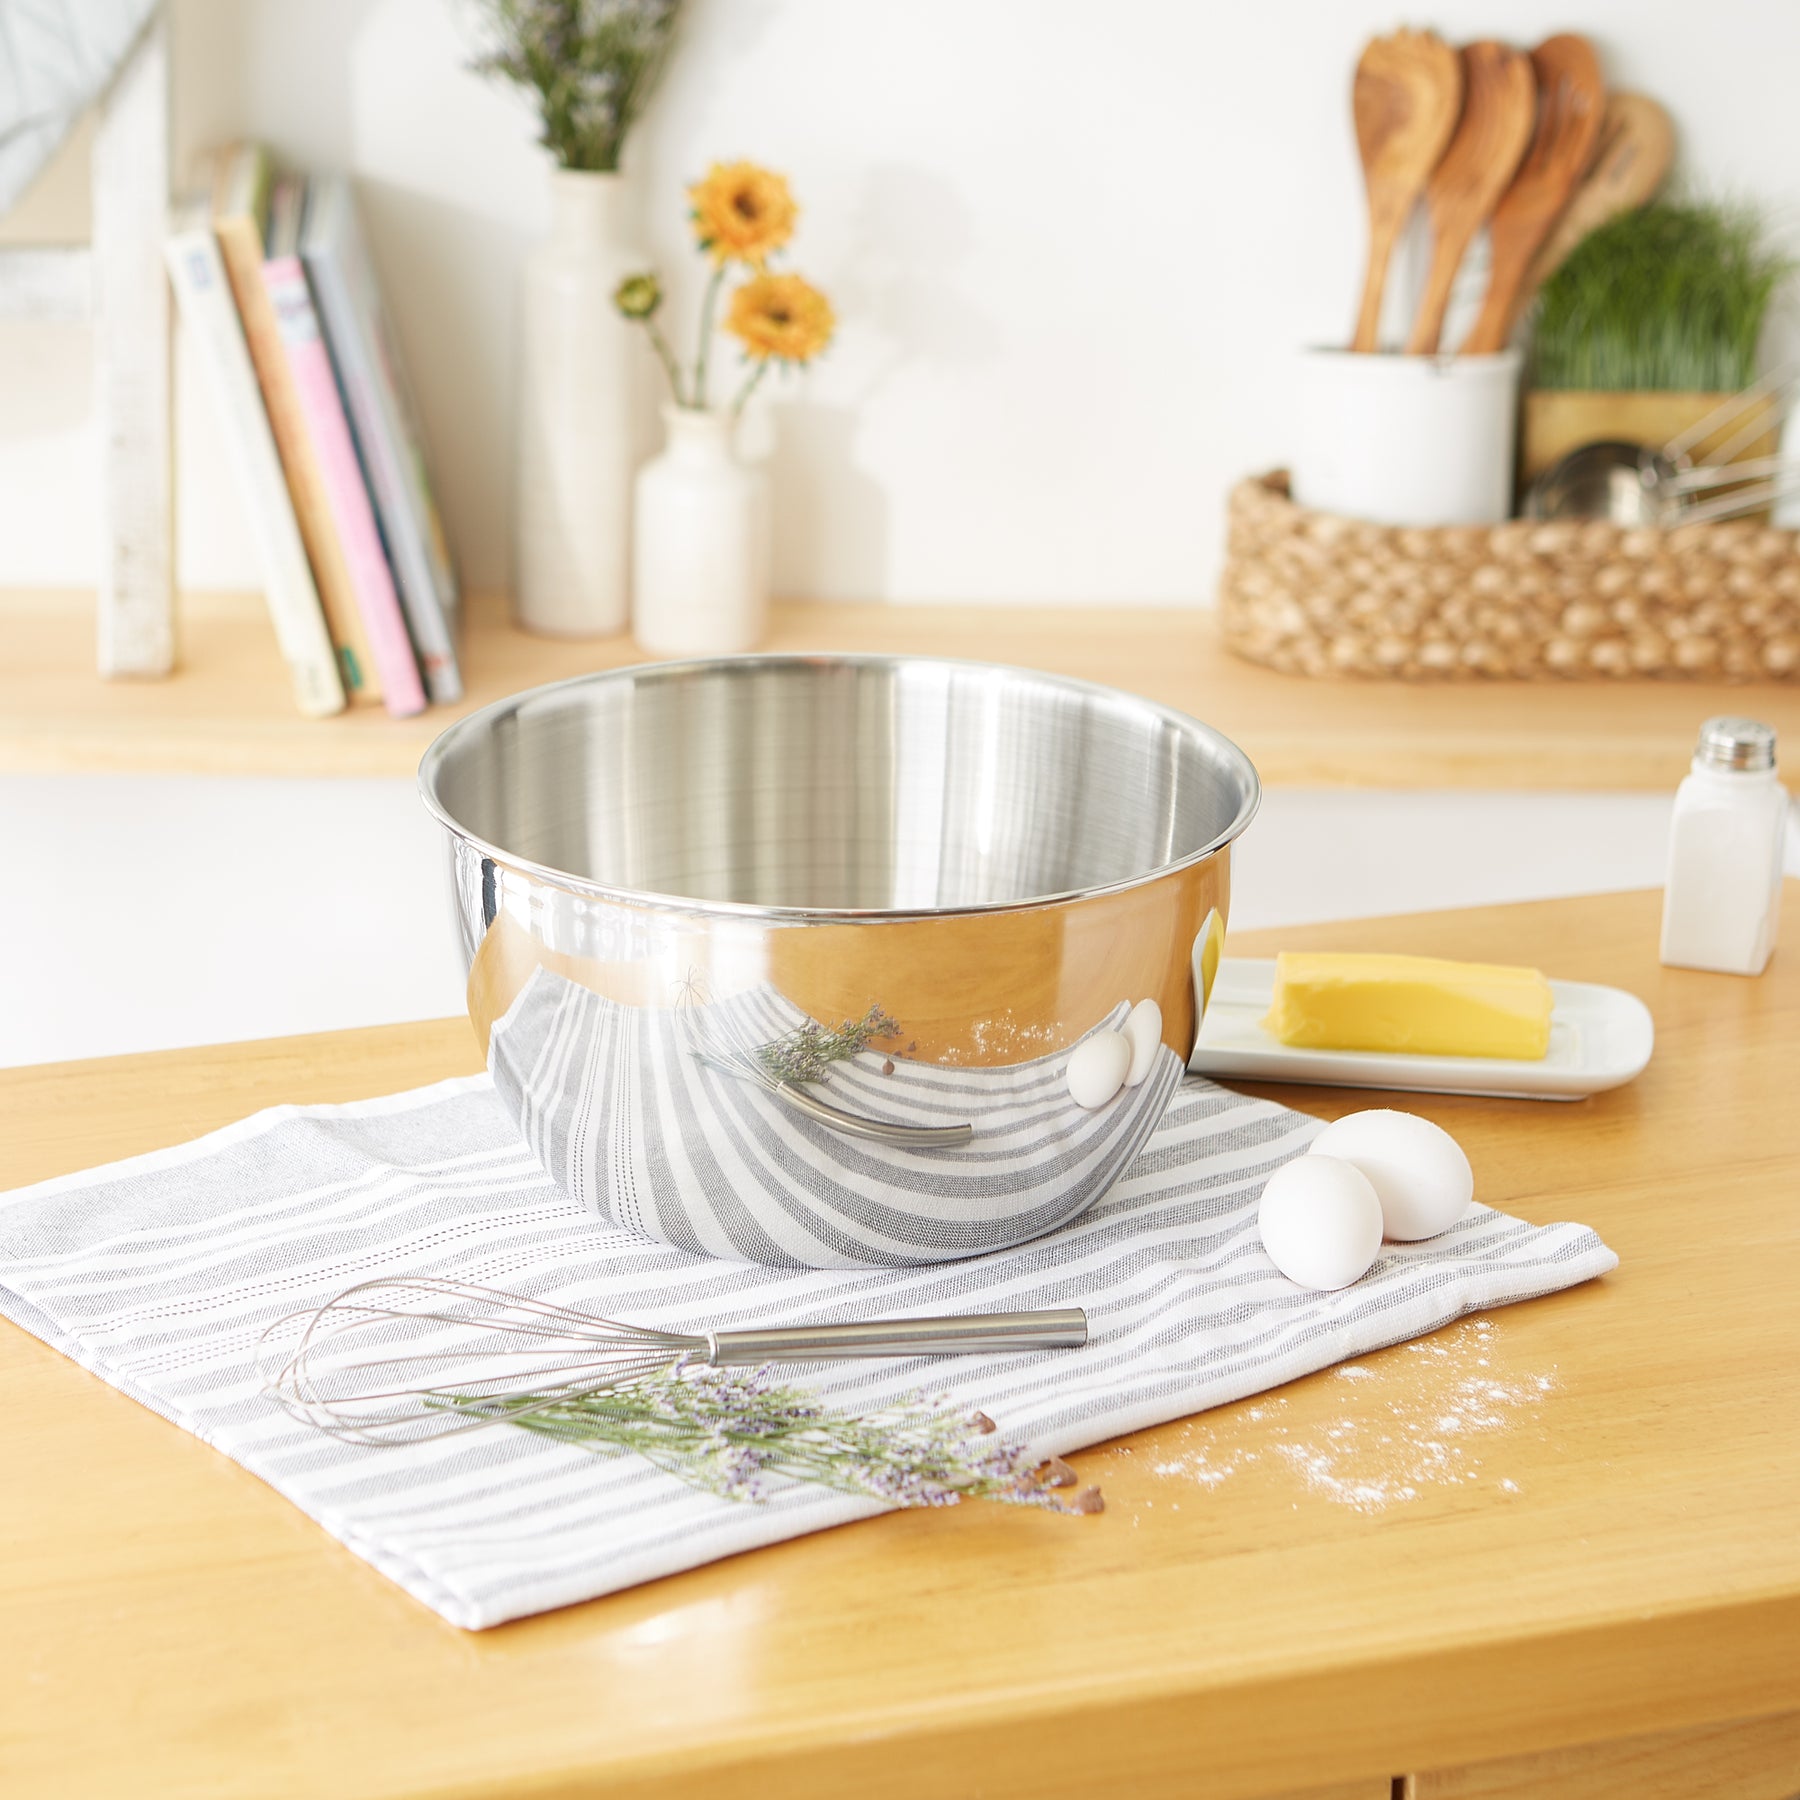 8 Qt Mixing Bowl - Stainless Steel – RSVP International